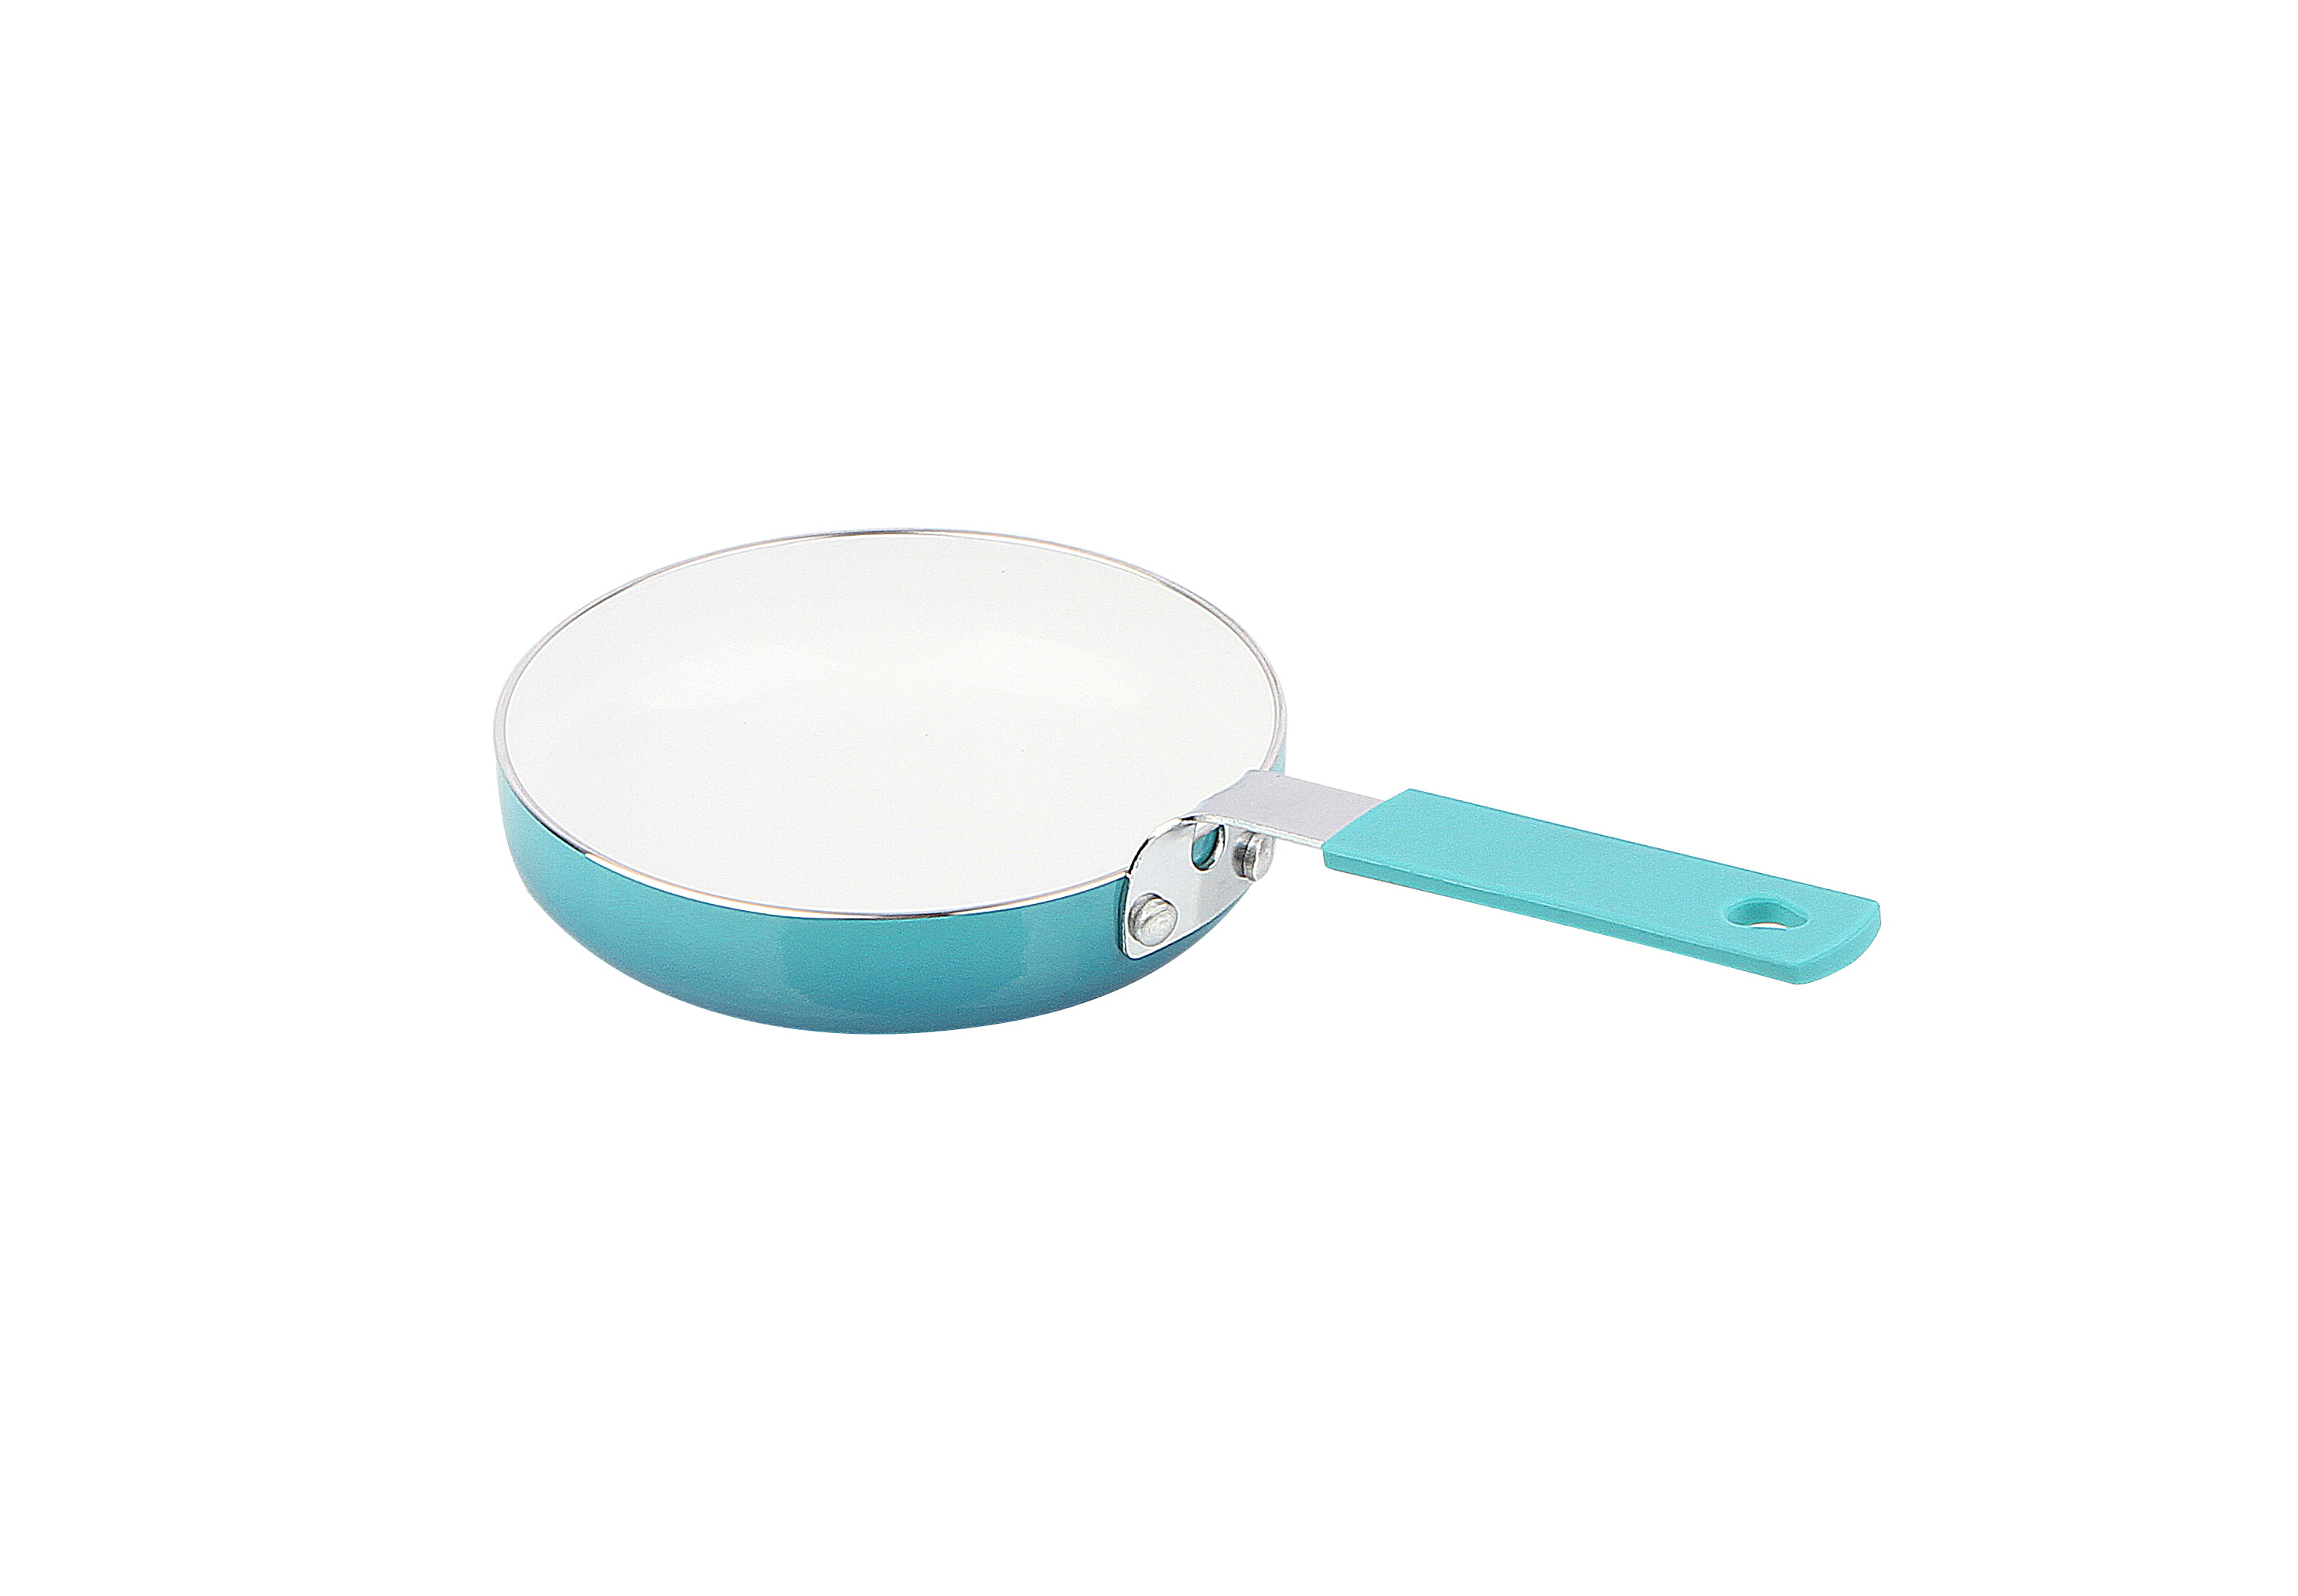 Mainstays Non-Stick Ceramic-Coated Aluminum Alloy 12in Frying Pan Blue  Linen 